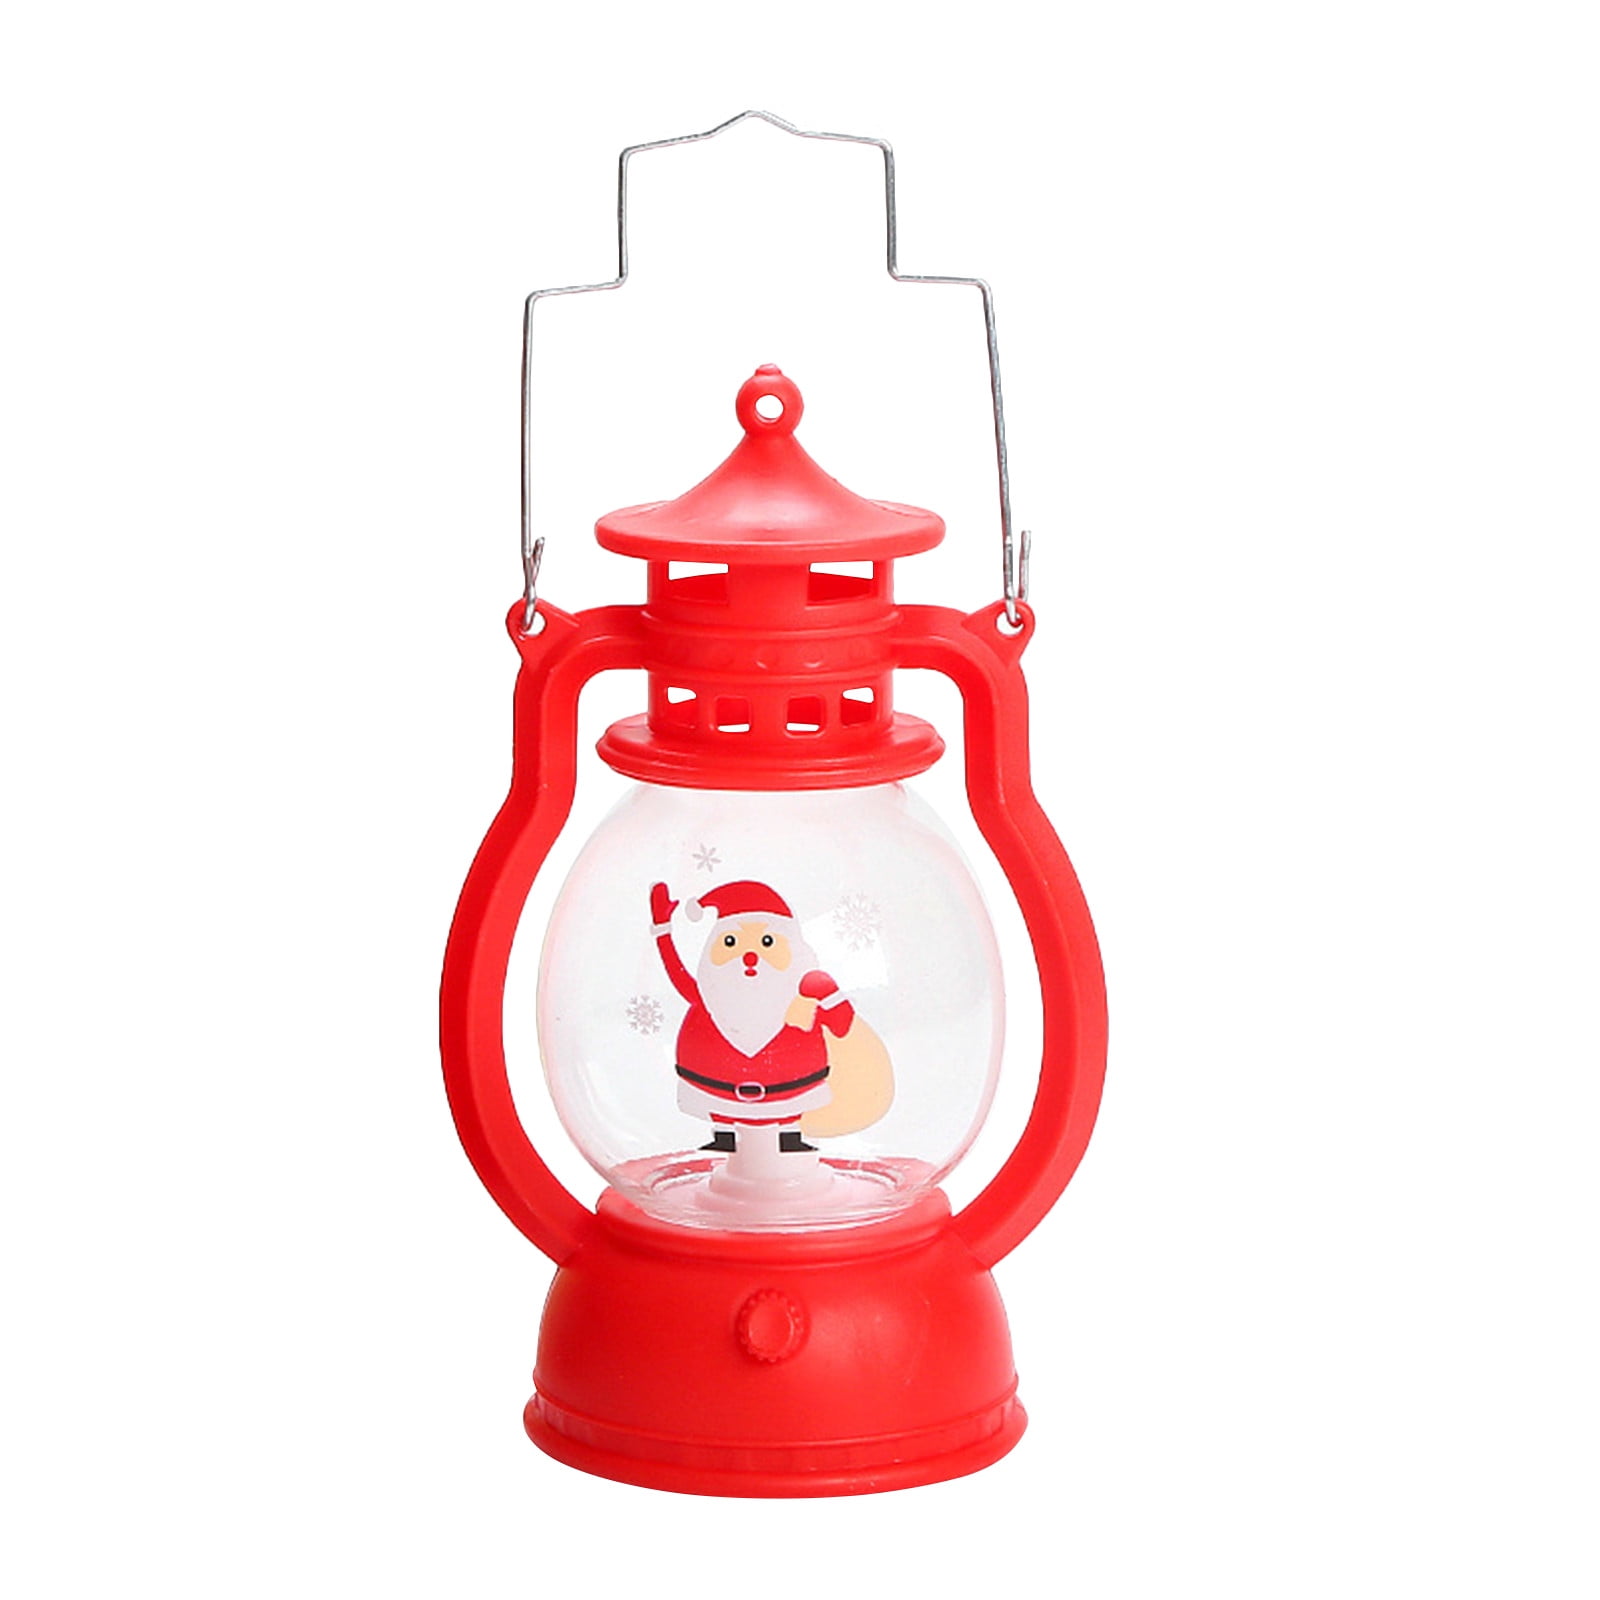  Arts and Crafts for Adults Beginners Christmas Decoration  Christmas Telephone Booth Wind Lamp Decoration Home Props Red Light Phone  Booth 10ml Arts and Crafts for Kids Ages 3-5 for (B, One